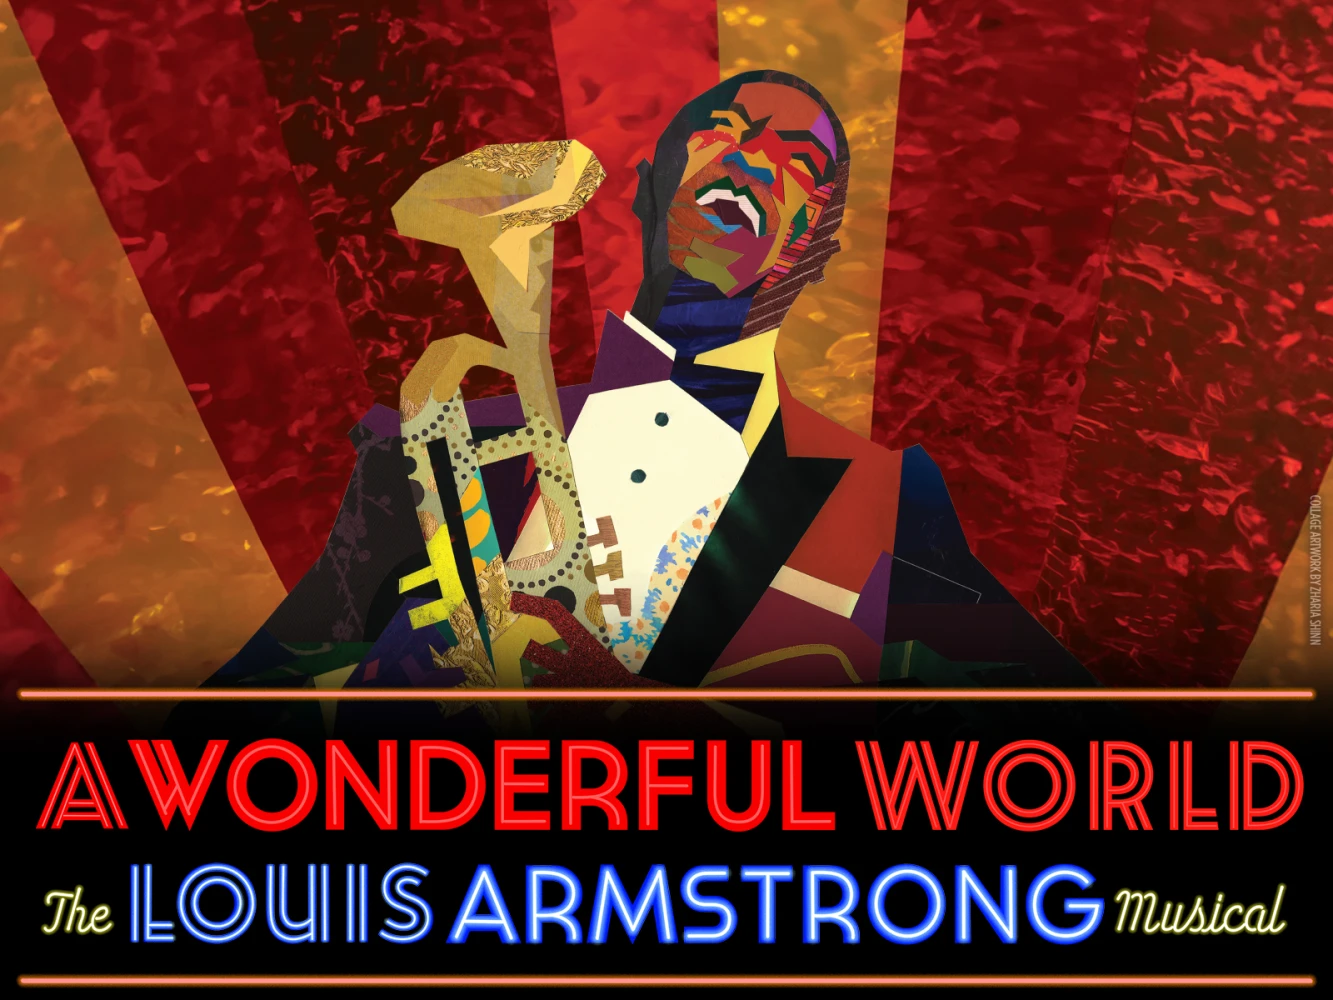 A Wonderful World: The Louis Armstrong Musical on Broadway: What to expect - 3